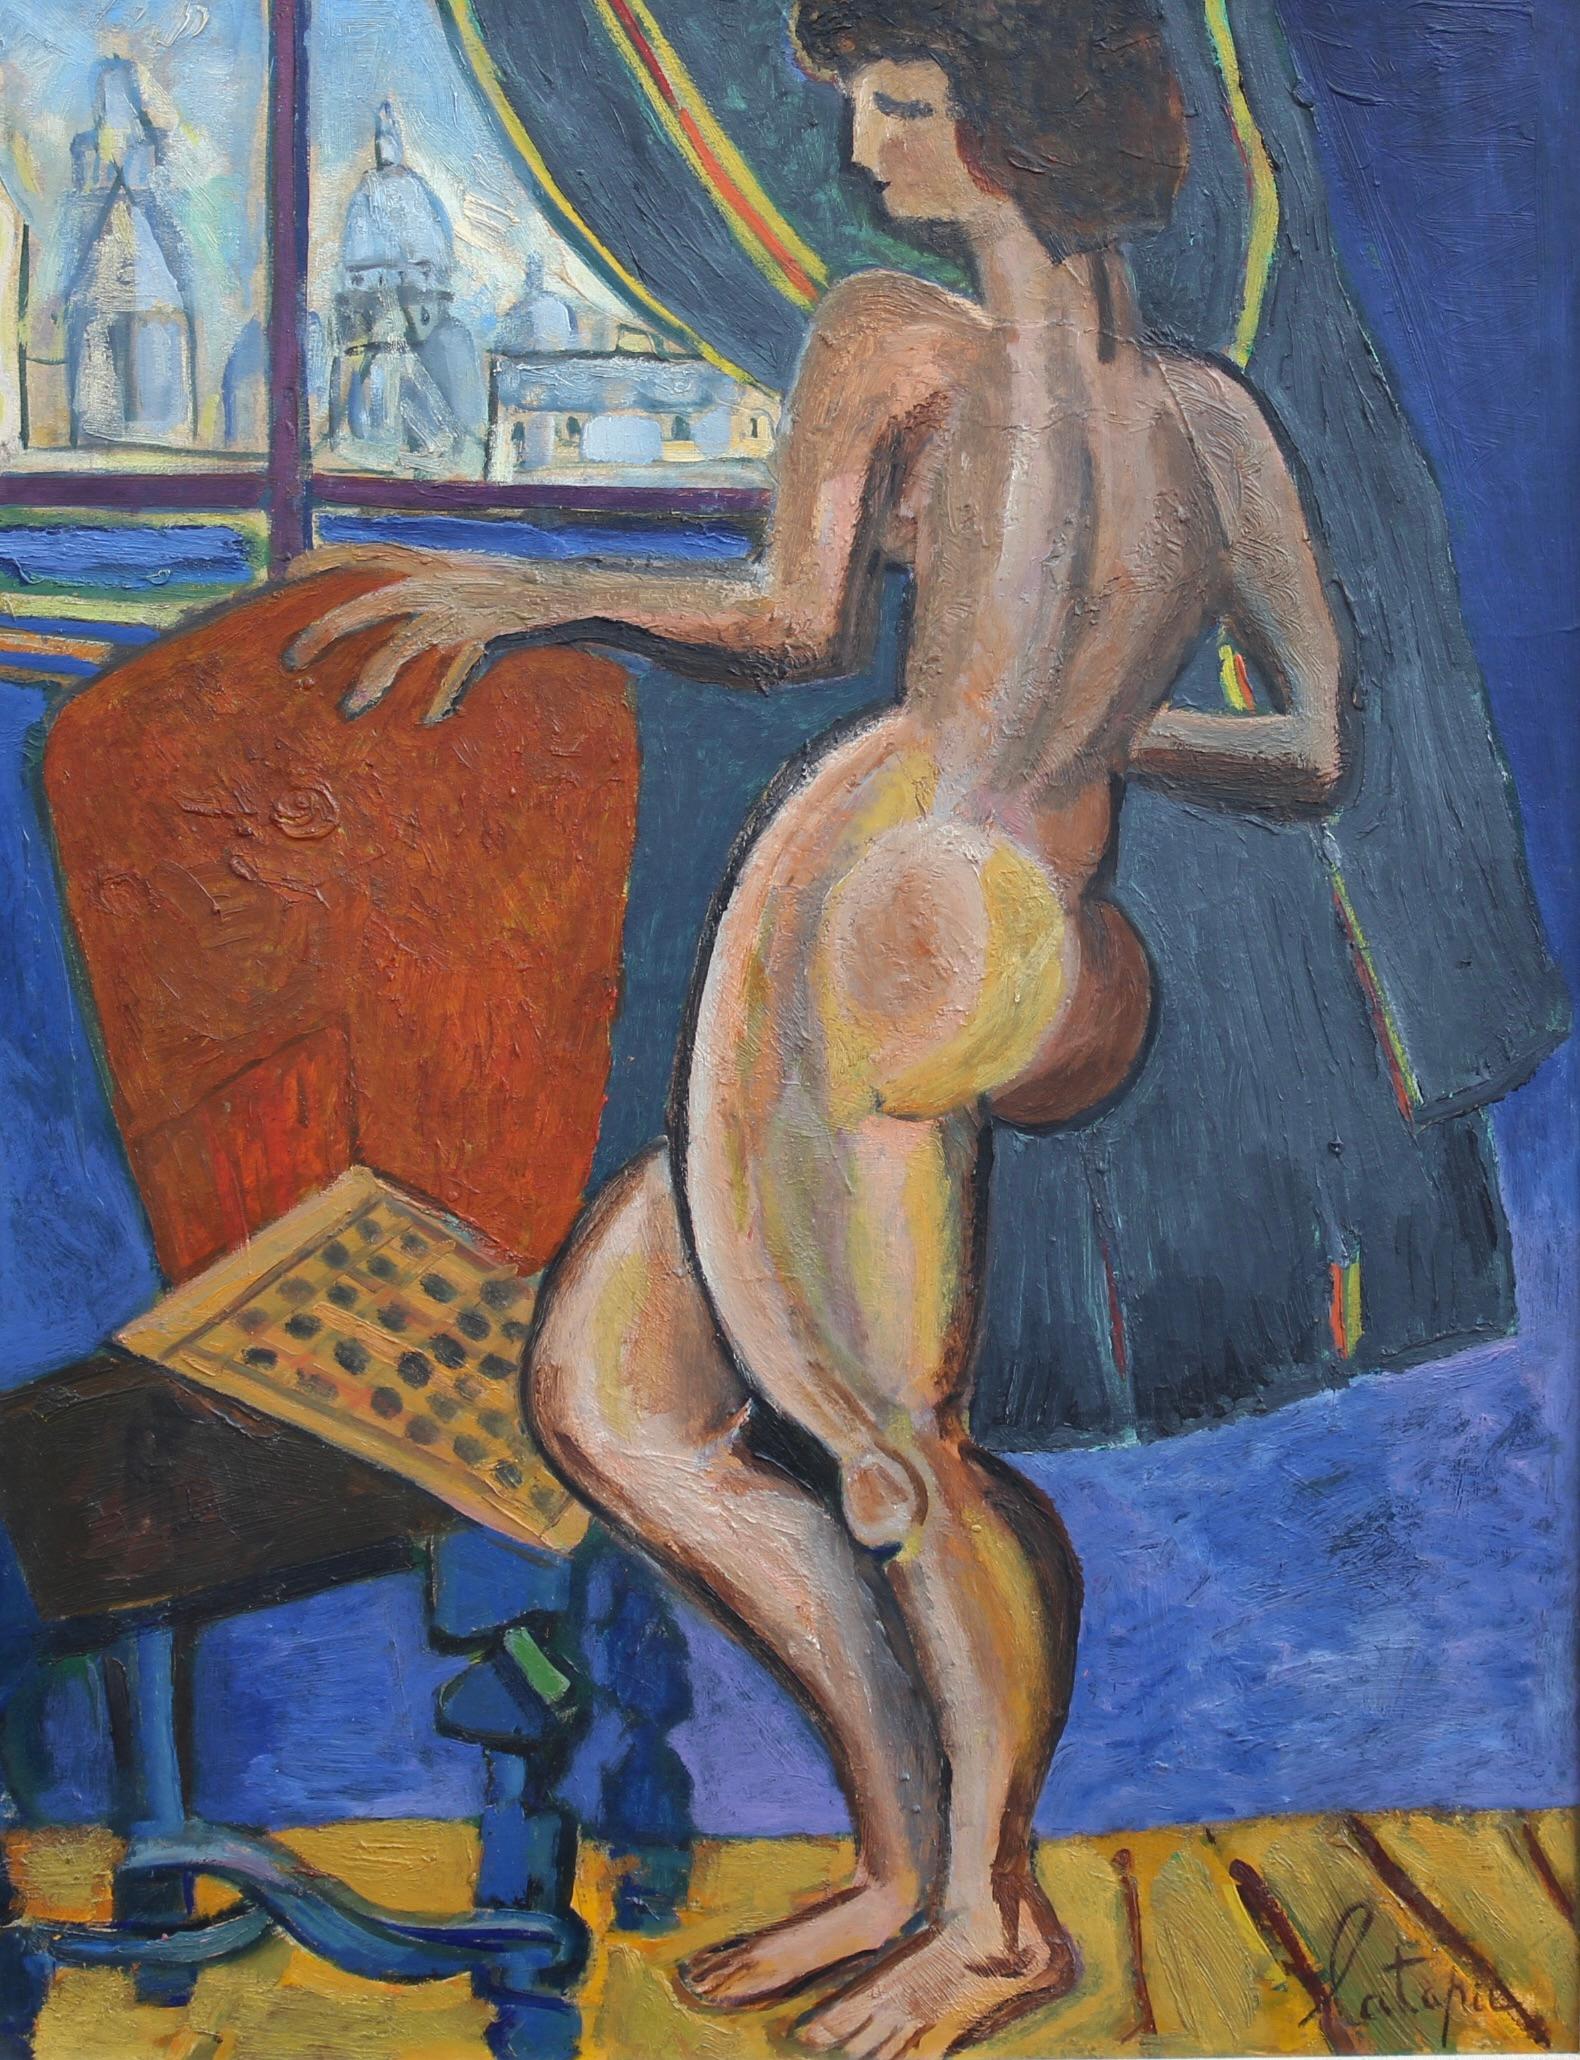 Nude at the Window Overlooking Sacré-Coeur - Painting by Louis Latapie